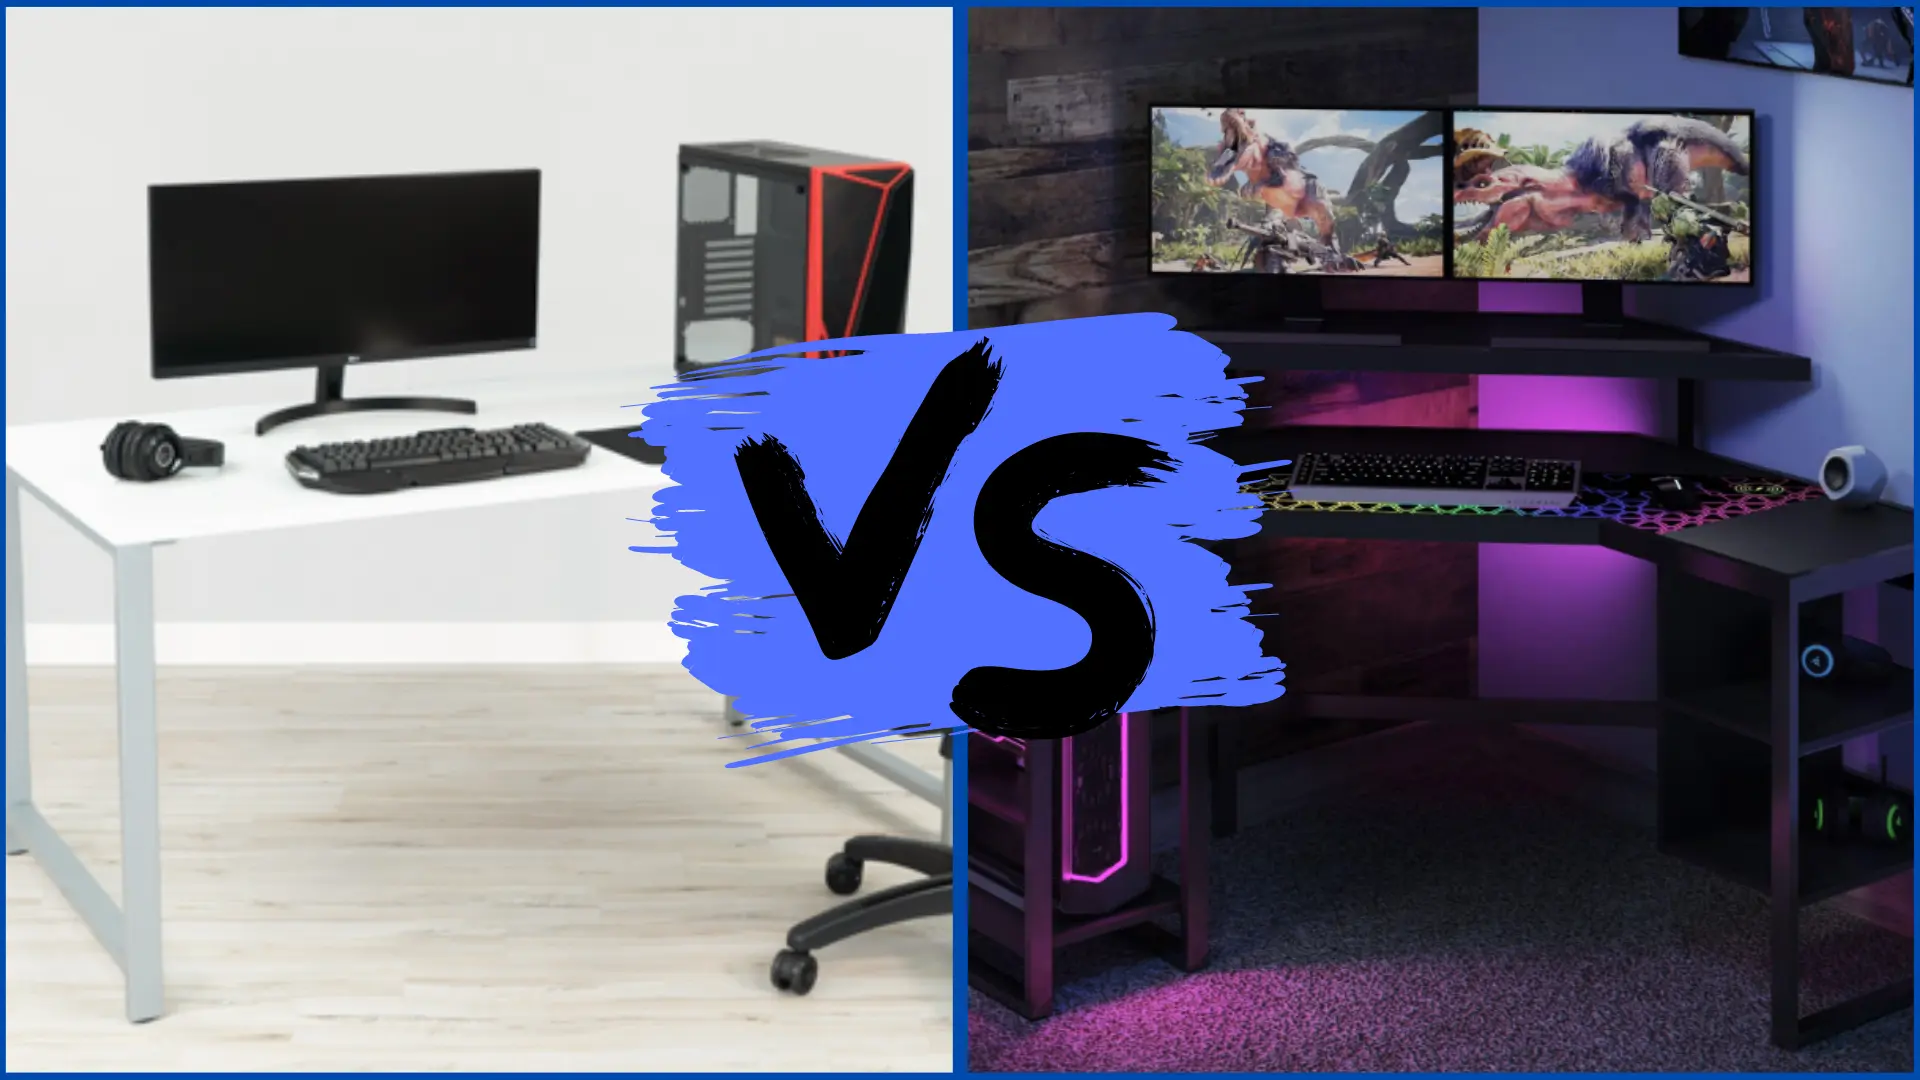 What Are the Differences Between Gaming Desks and Average Desks